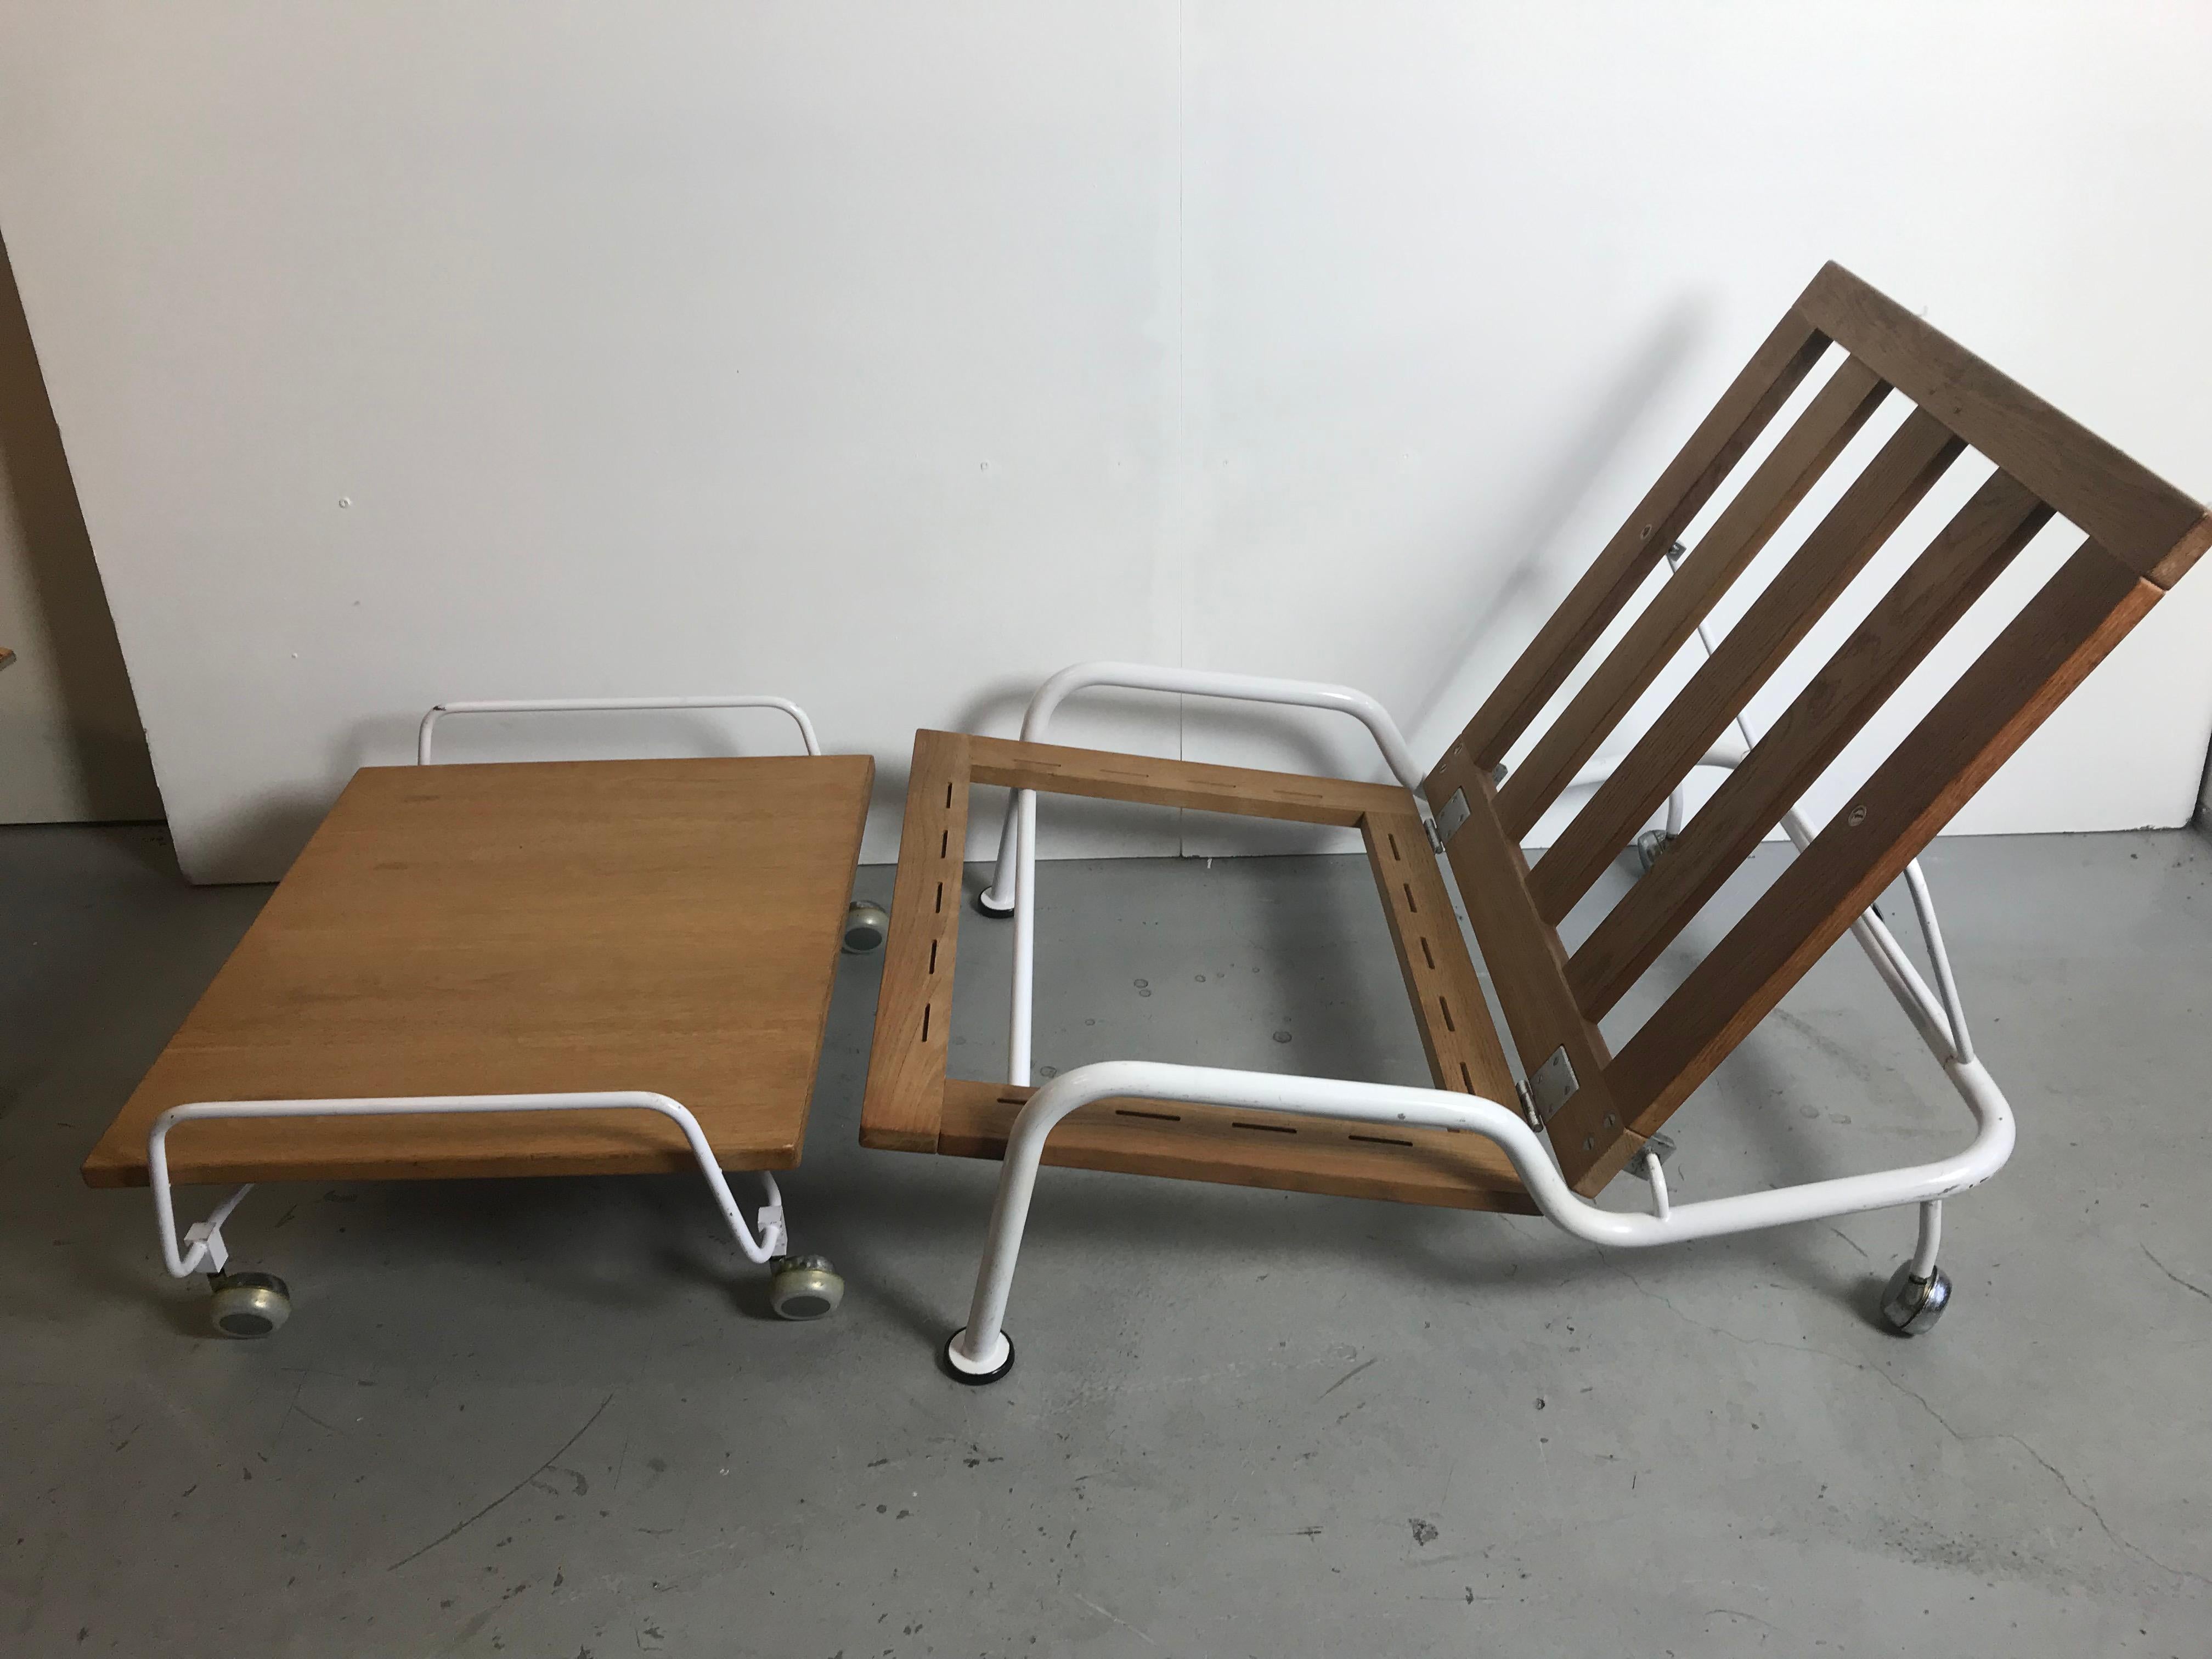 Rare Wegner easy chair with ottoman.
It is a prototype named GE 440. This item is produced in Denmark for GETAMA in the late 1960s.
Made of white lacquered metal with original upholstered pillows. The chair has been designed for an exposition in